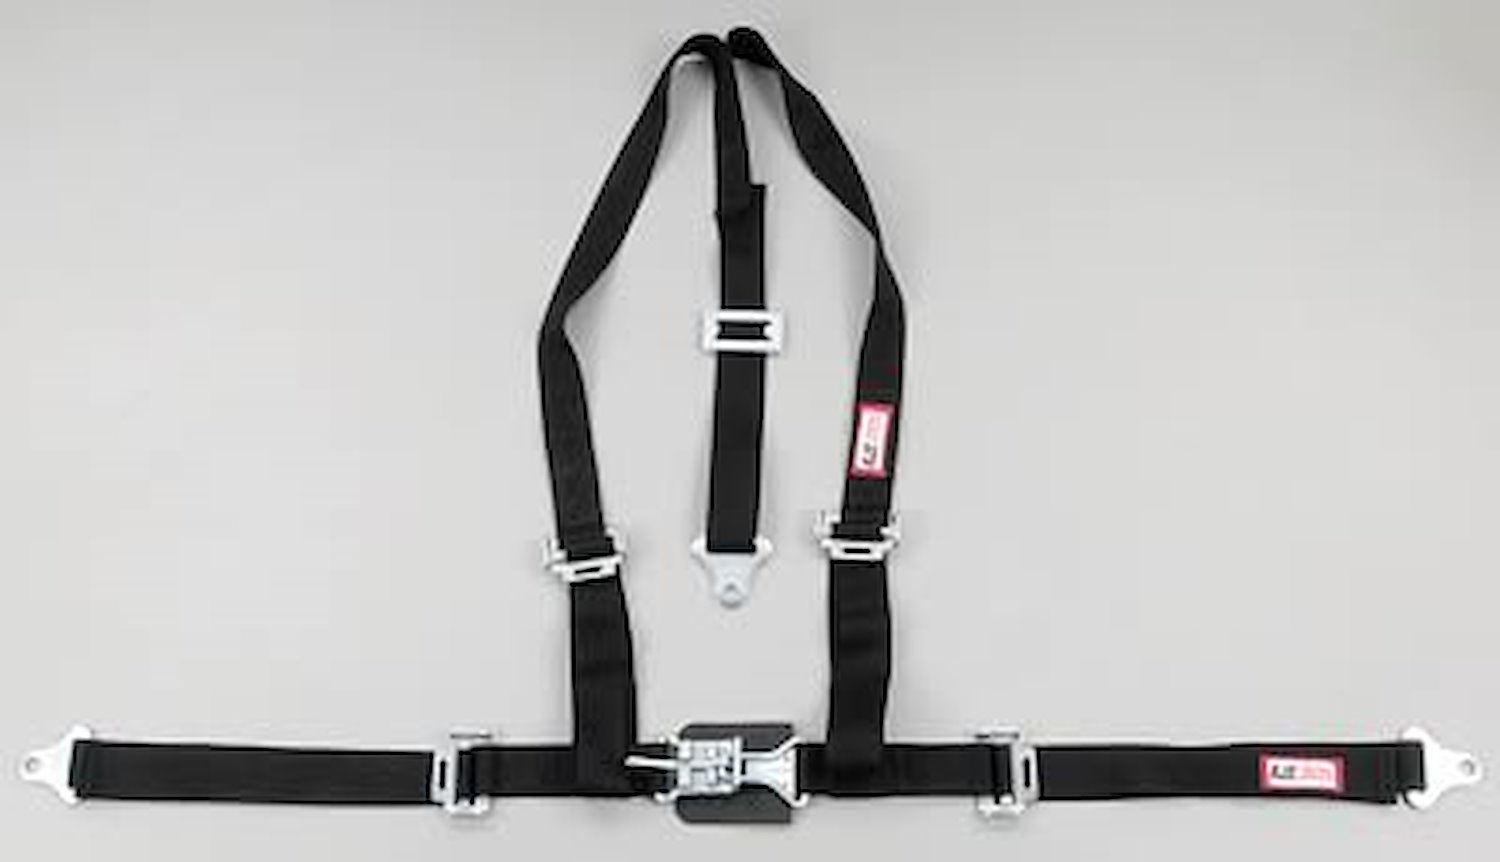 NON-SFI L&L HARNESS 2 PULL DOWN Lap Belt SEWN IN 2 S.H. INDIVIDUAL FLOOR Mount w/STERNUM STRAP ALL WRAP ENDS YELLOW